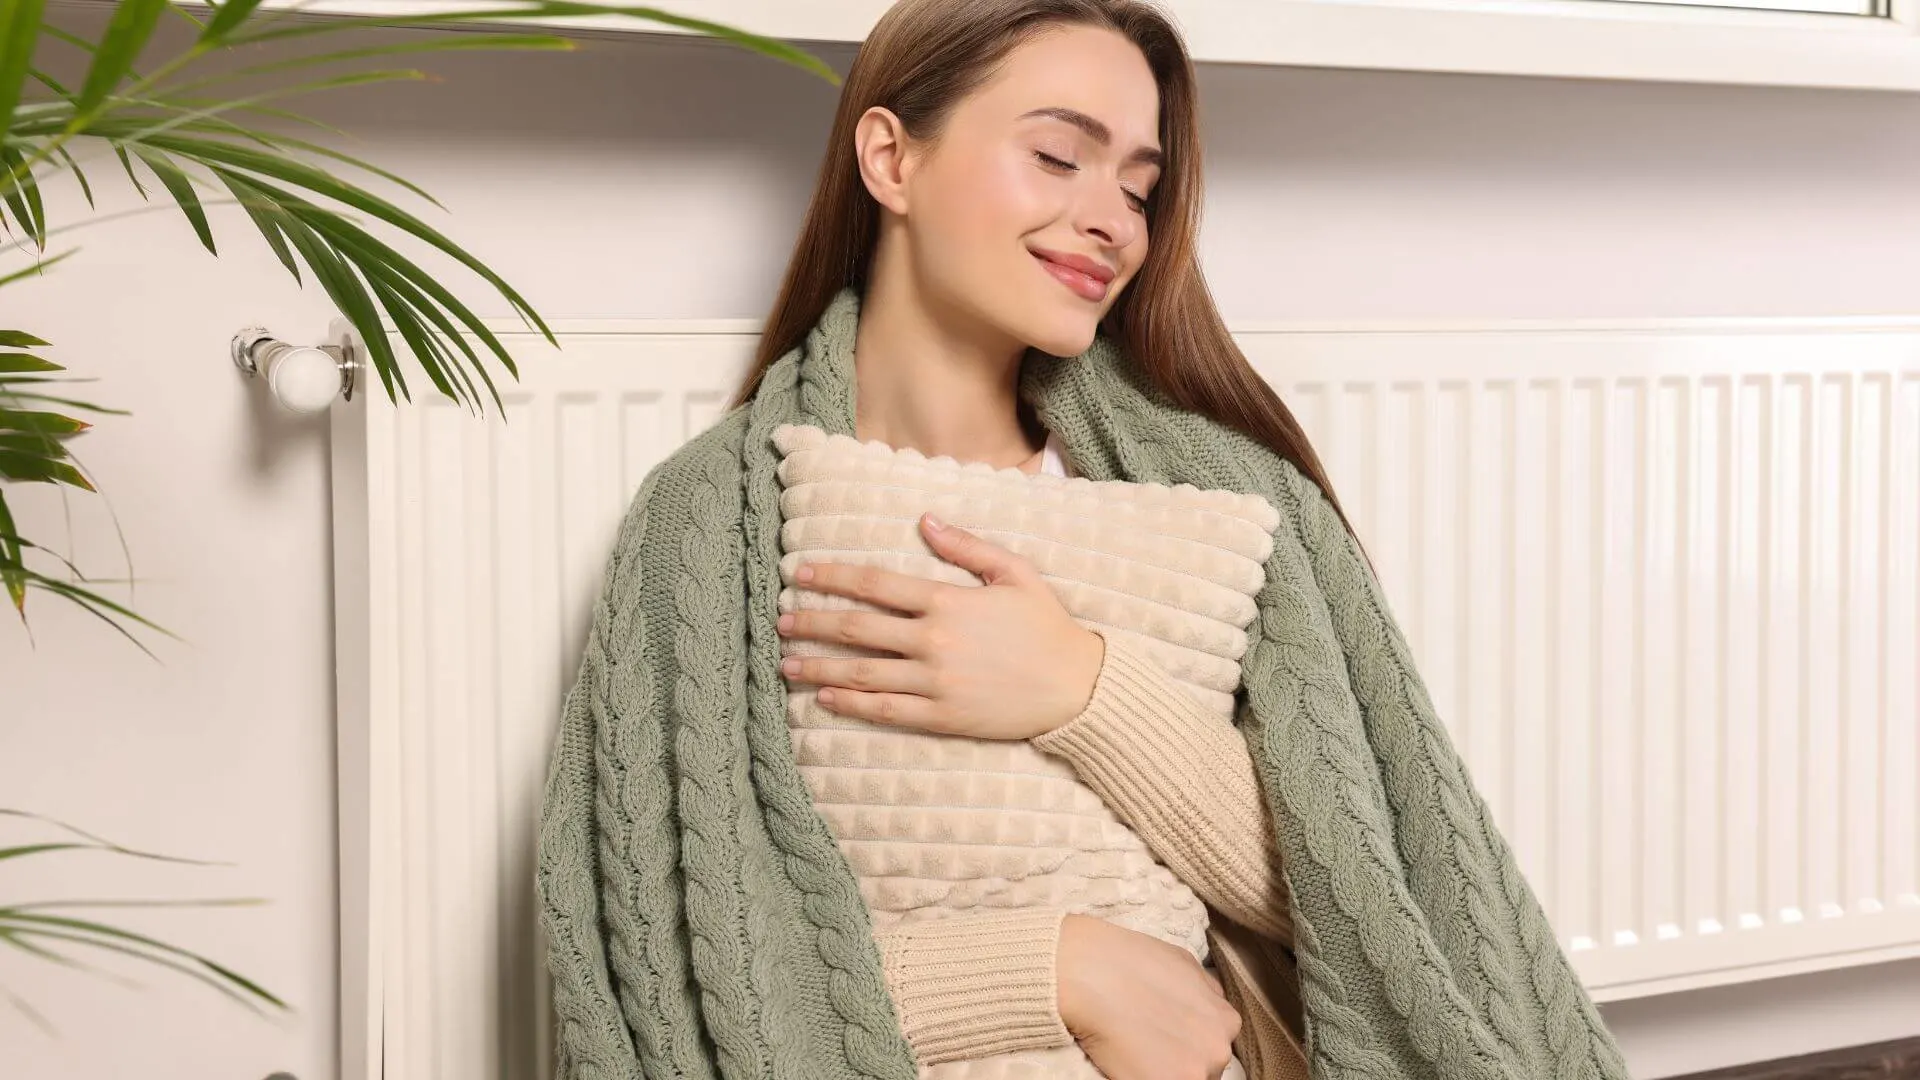 A Complete Guide to Choosing a Battery-Operated Heated Blanket